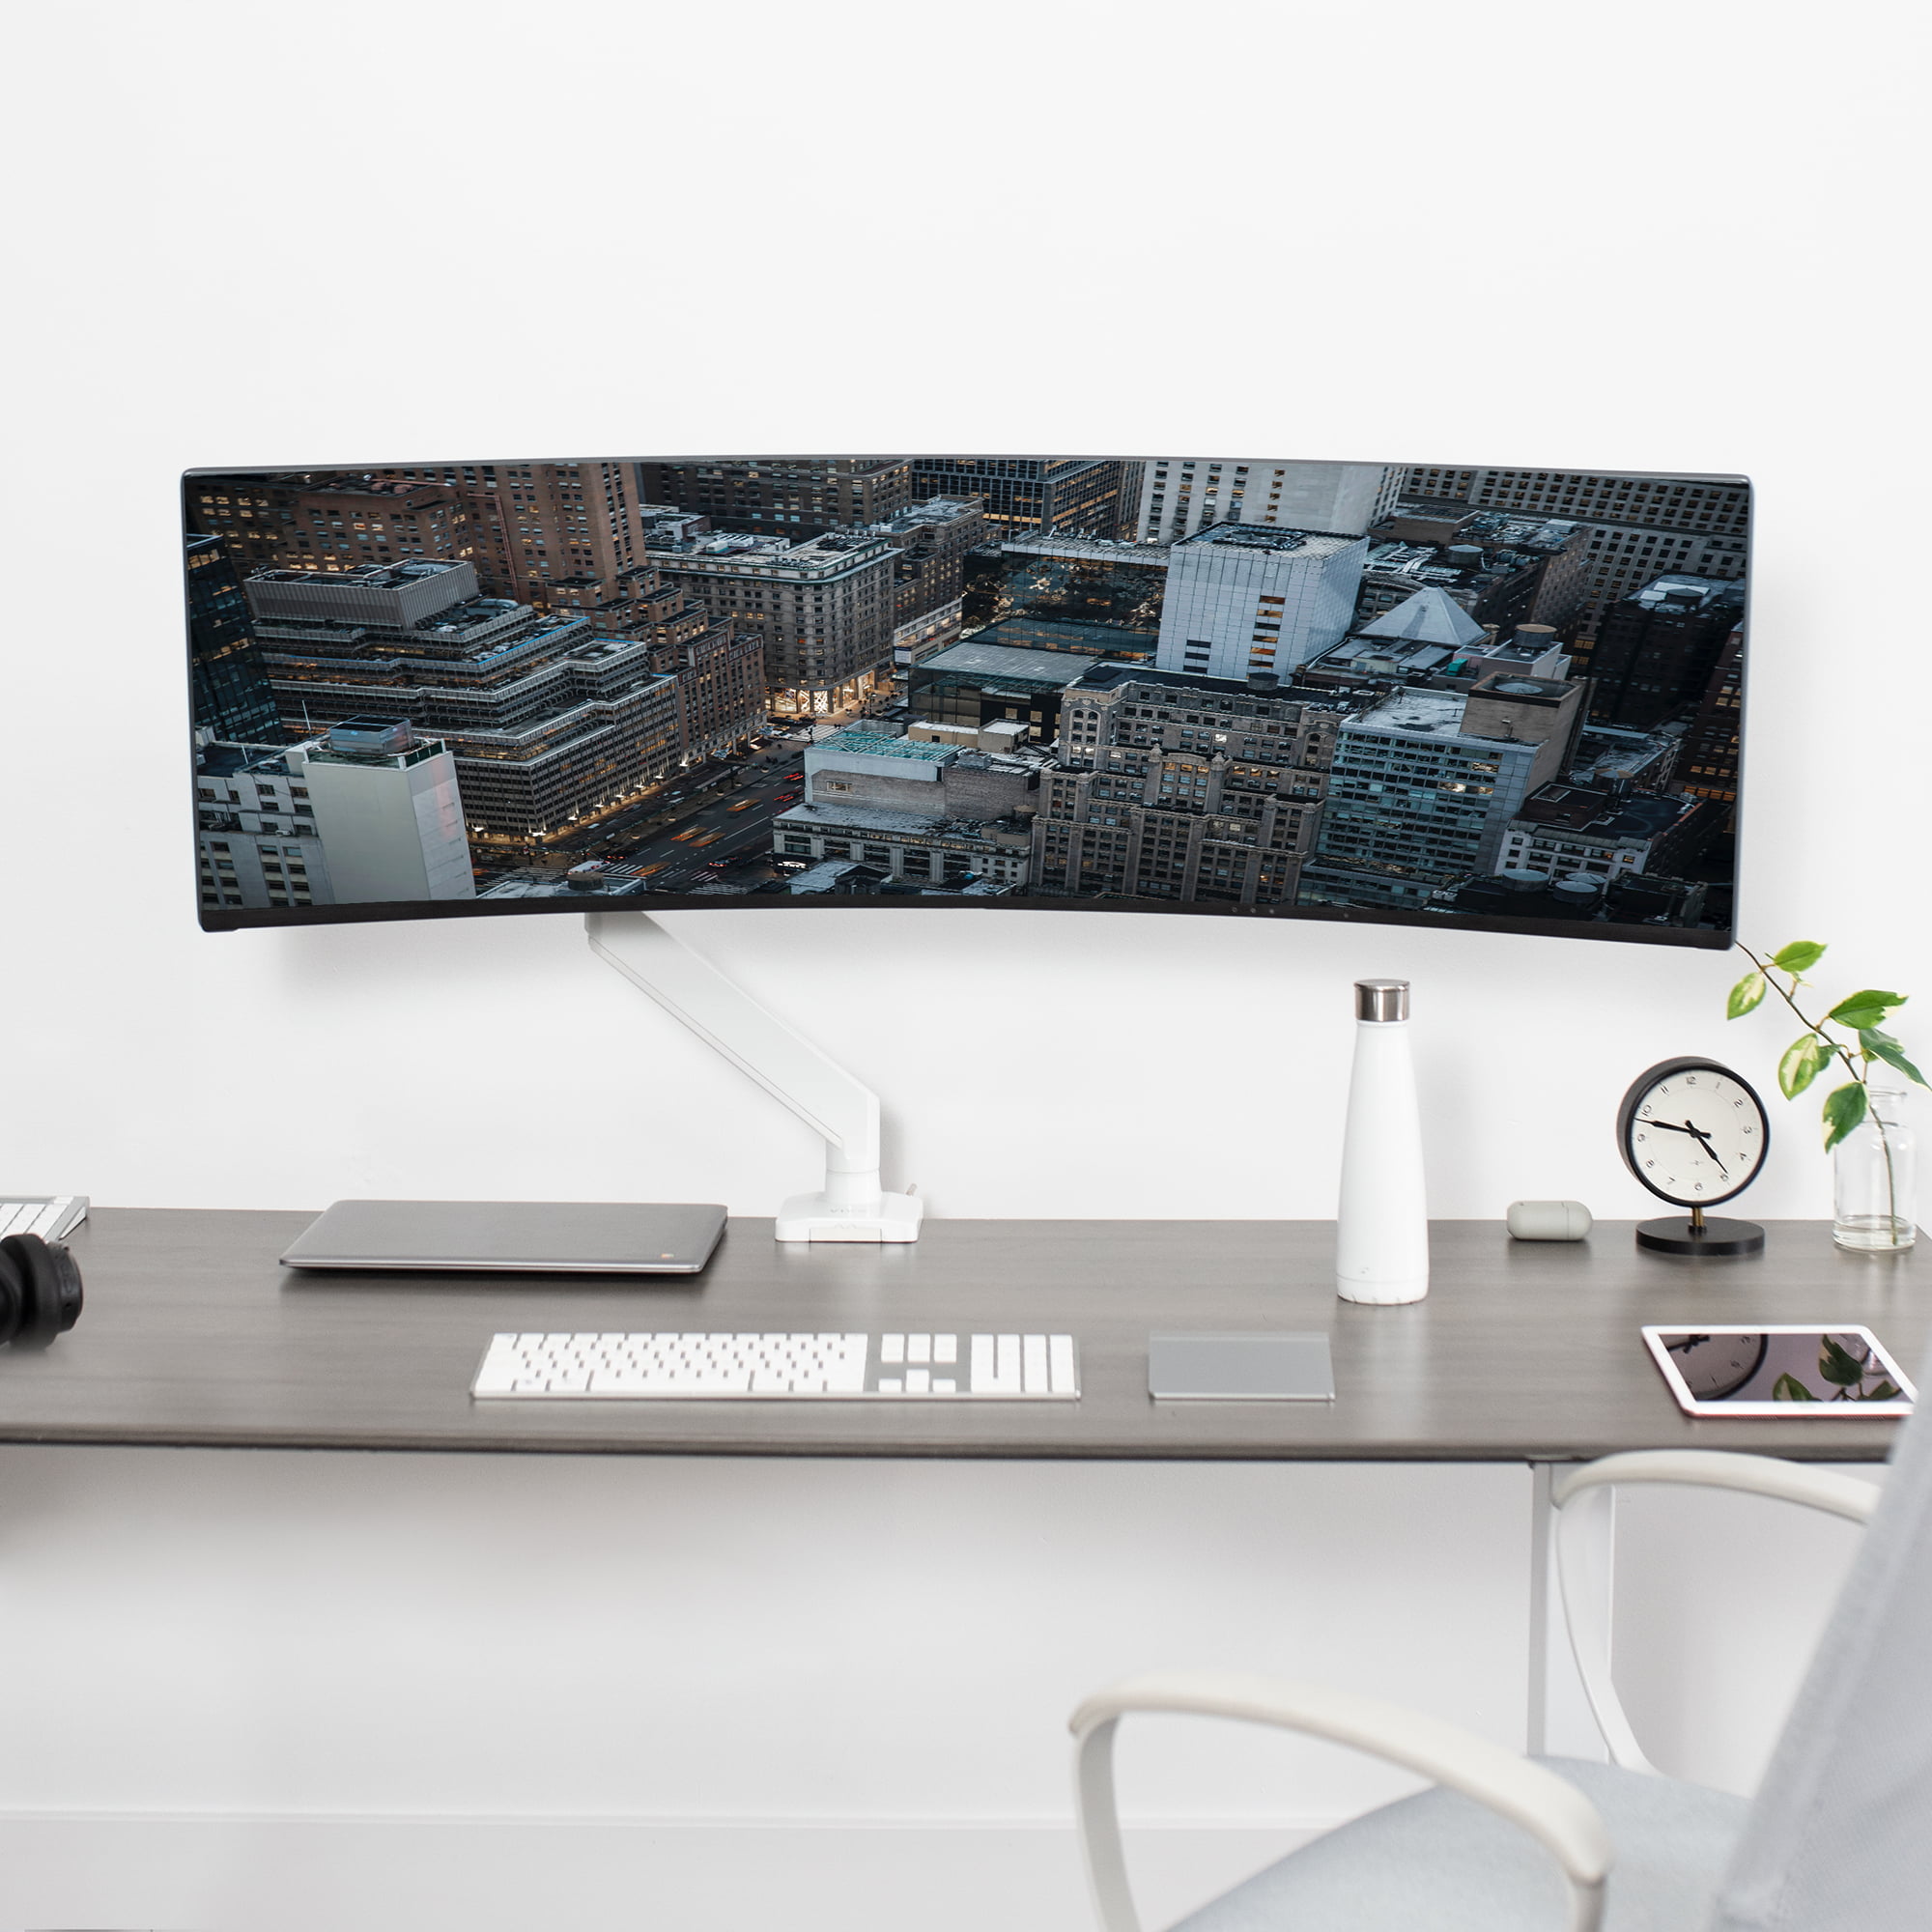 Pneumatic Arm Single Ultrawide Monitor Desk Mount – VIVO - desk solutions,  screen mounting, and more